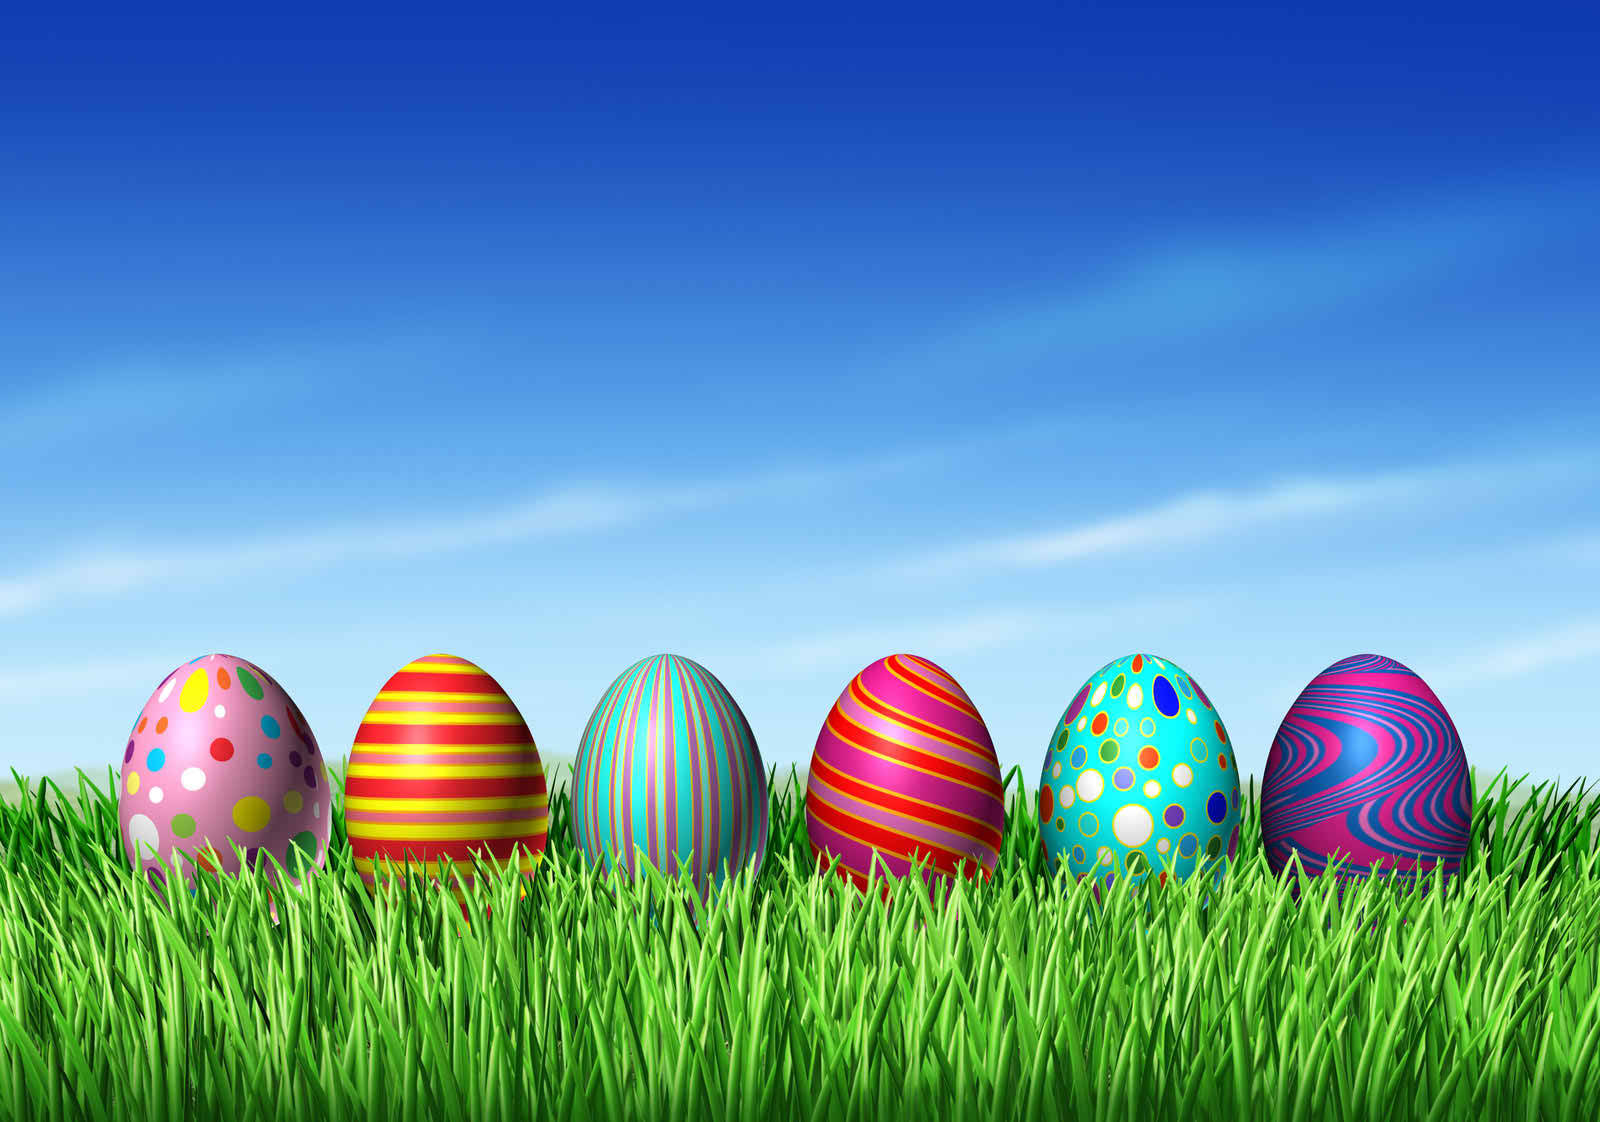 Celebrate Easter with Colorful Eggs! Wallpaper